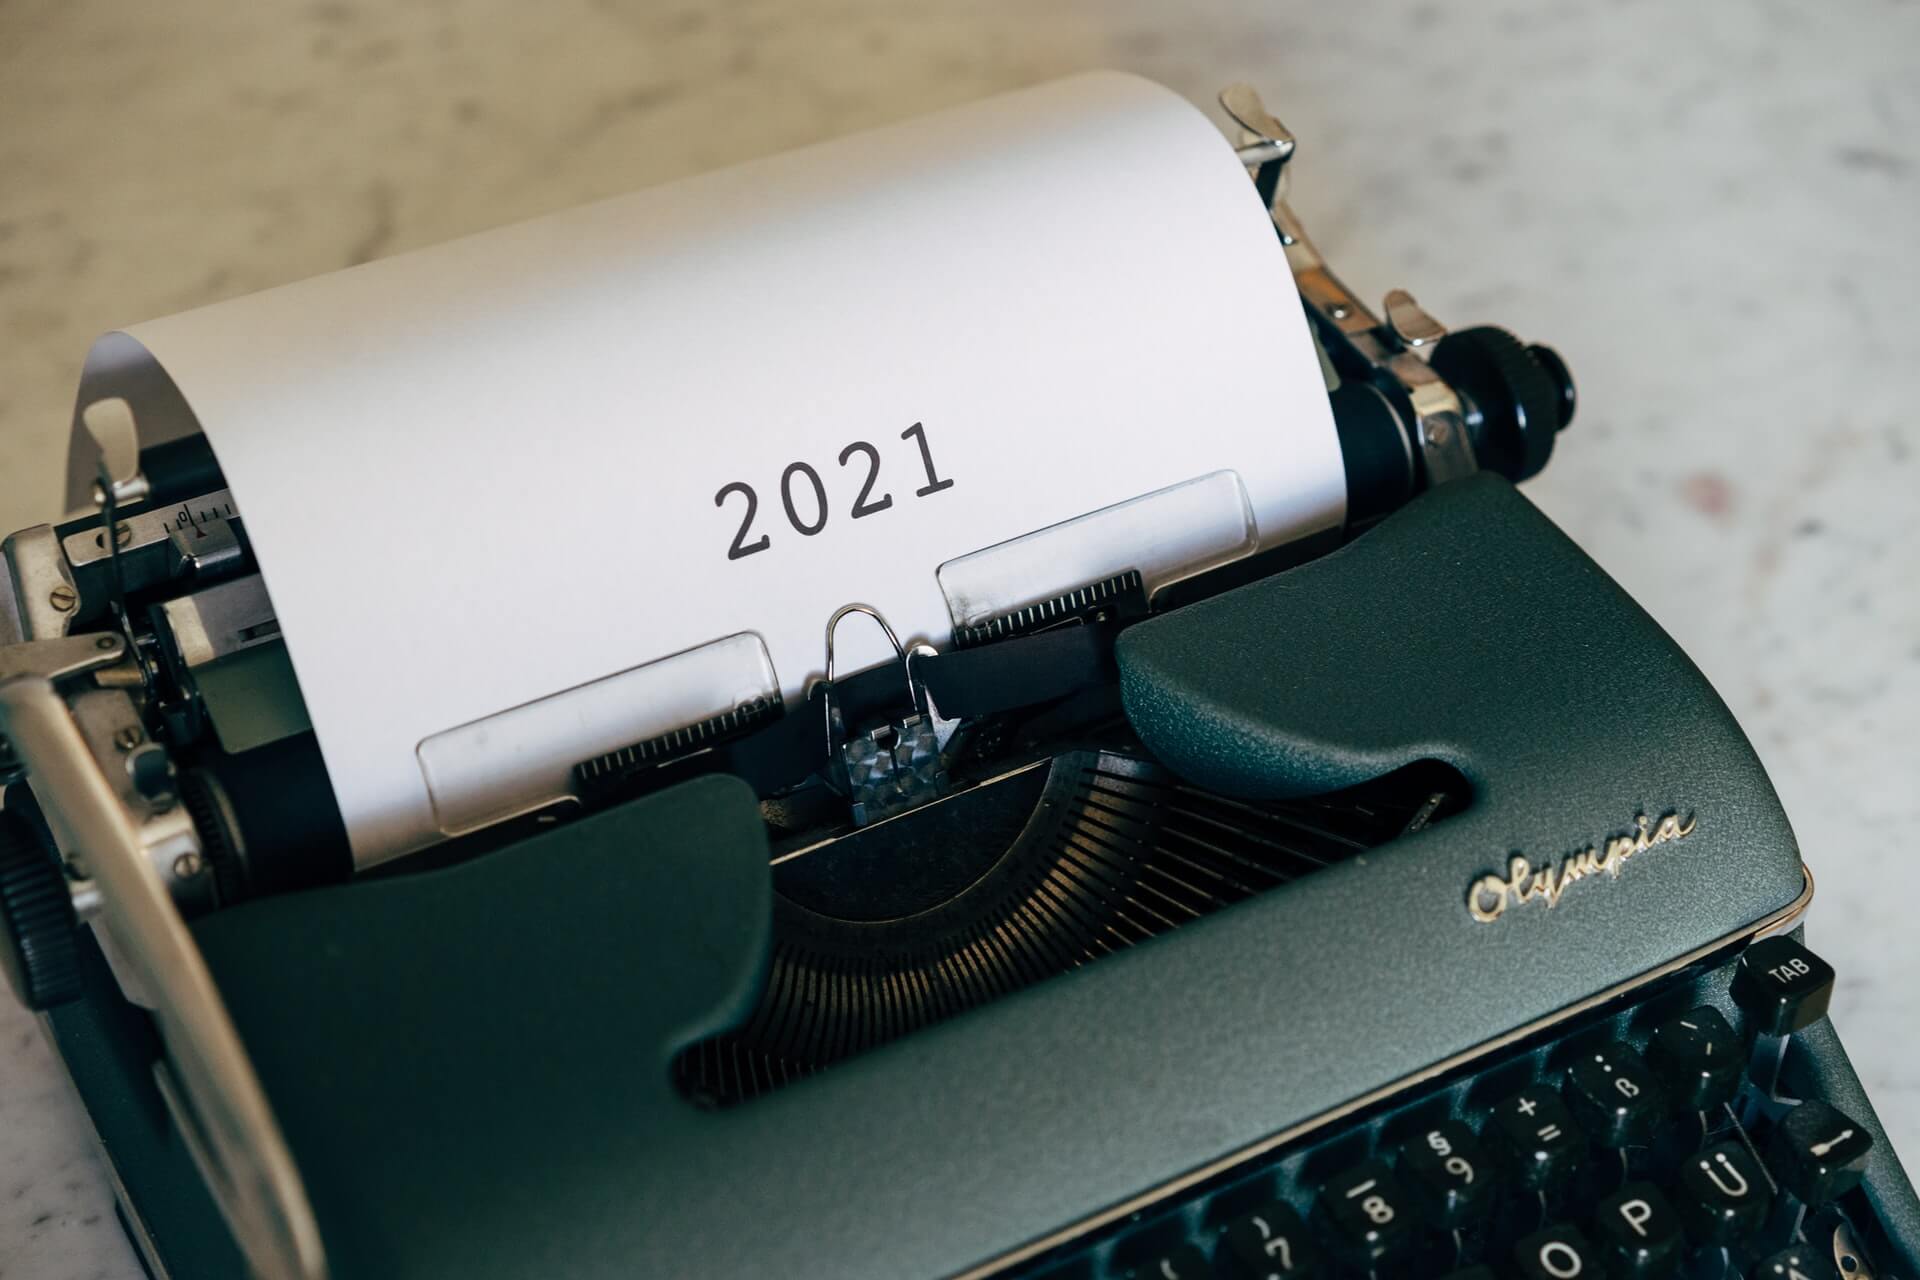 Page in Olympus typewriter with "2021" typed onto it